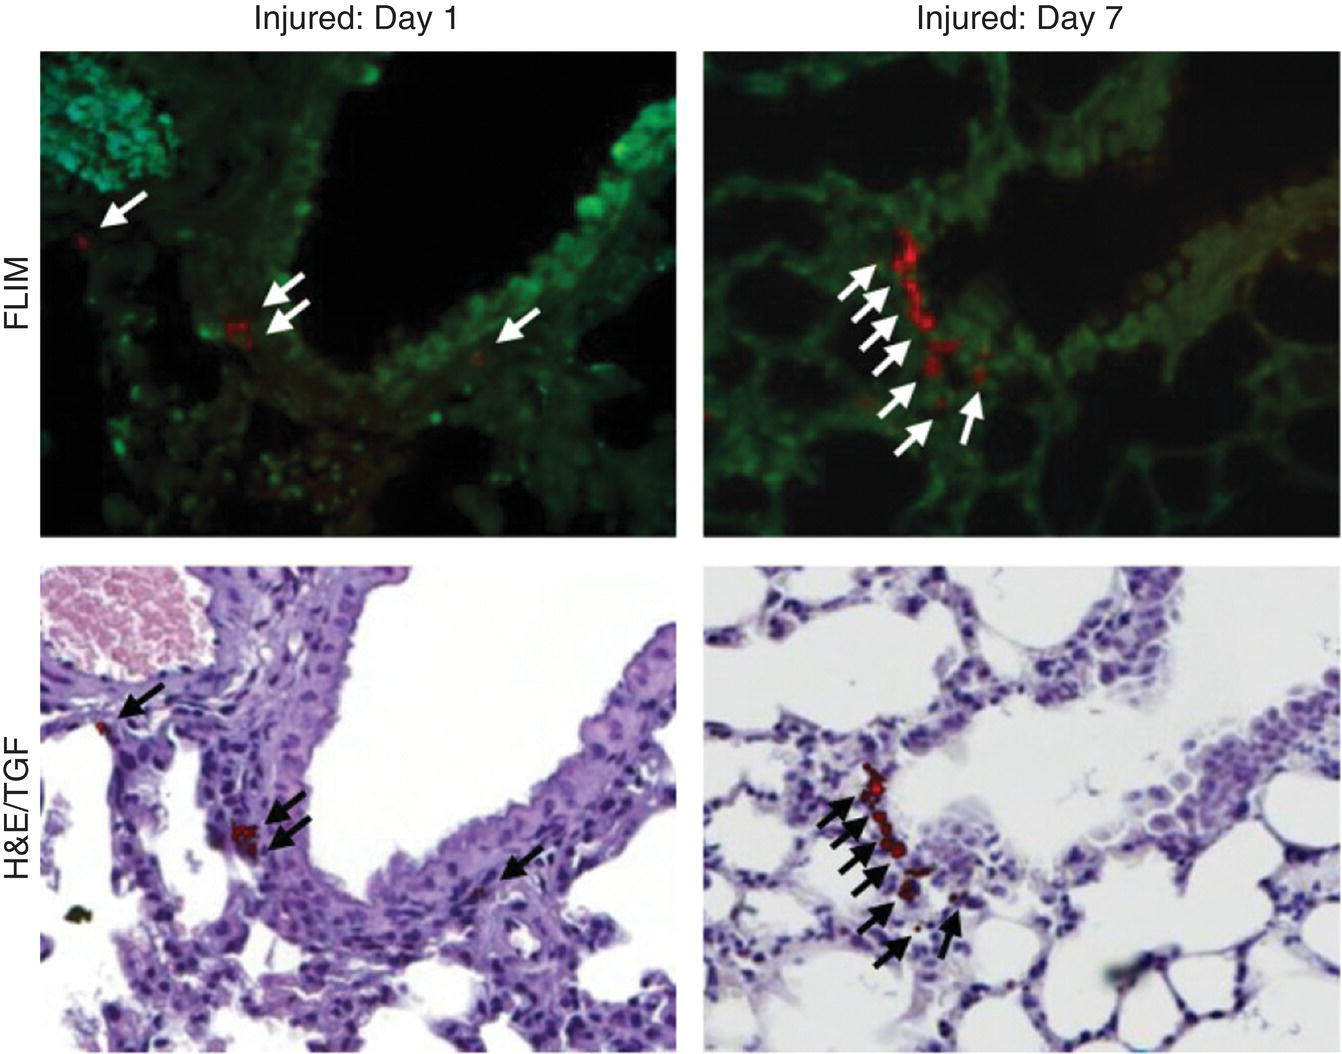 4 Photos displaying FLIM images (top) and their corresponding H&E/TGF images (bottom) of the lung tissue collected on days 1 (left) and 7(right). Each image has arrows indicating the identified cells.